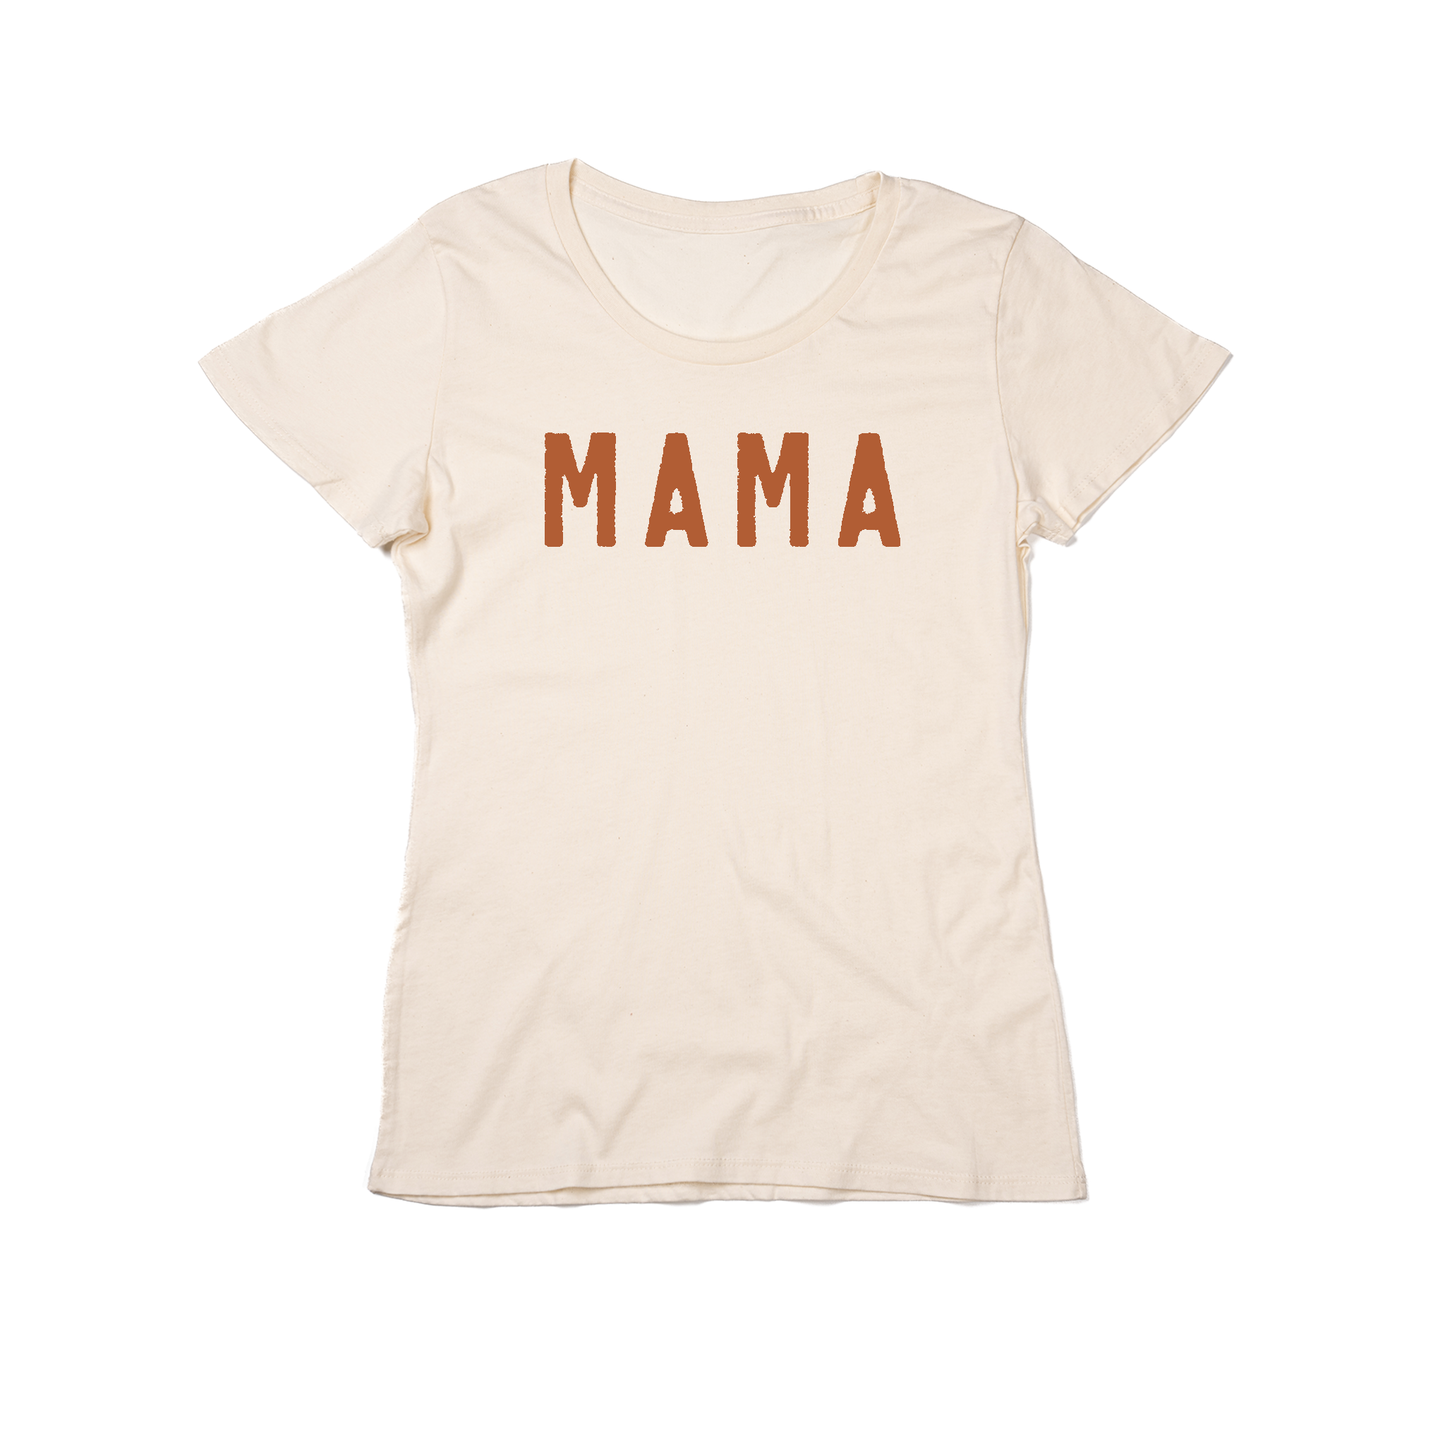 Mama (Rough, Rust) - Women's Fitted Tee (Natural)